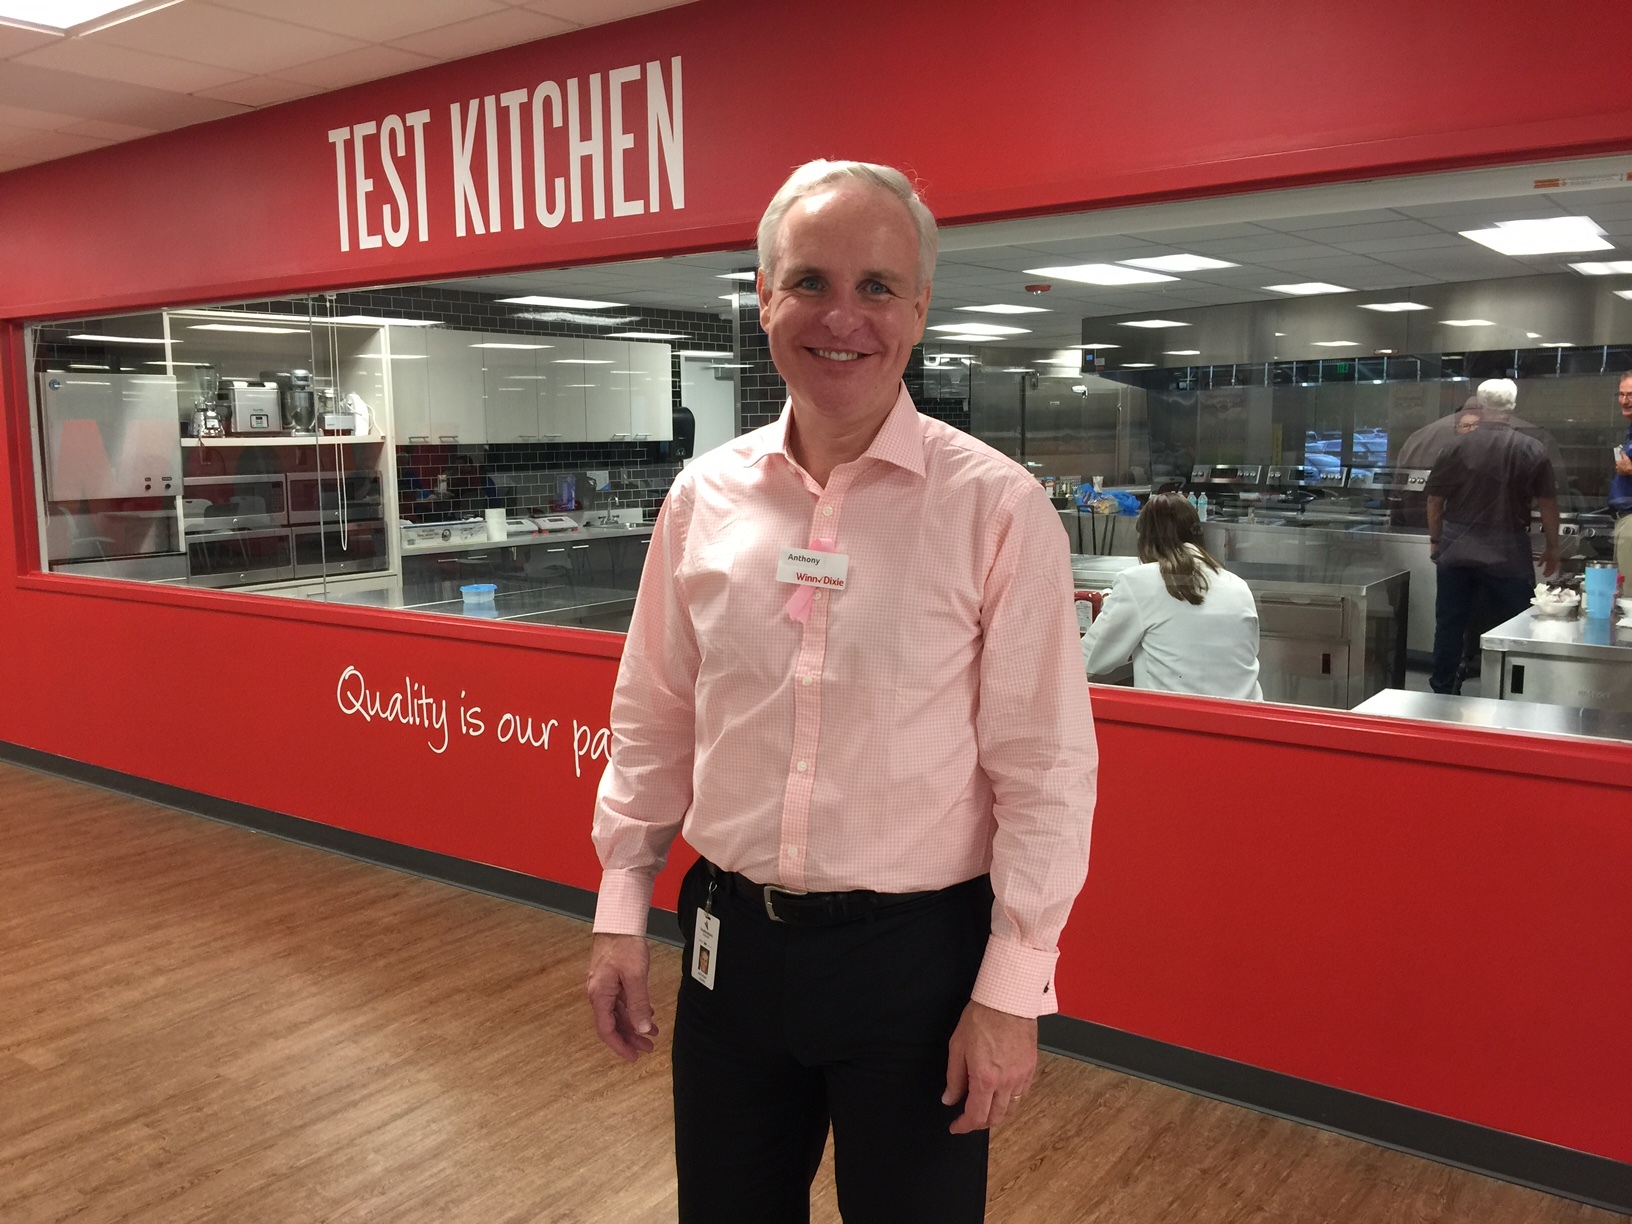 Southeastern Grocers CEO Anthony Hucker stands in front of the test kitchen at the company’s headquarters. The company has been working to improve the quality and value of its private-label brands.